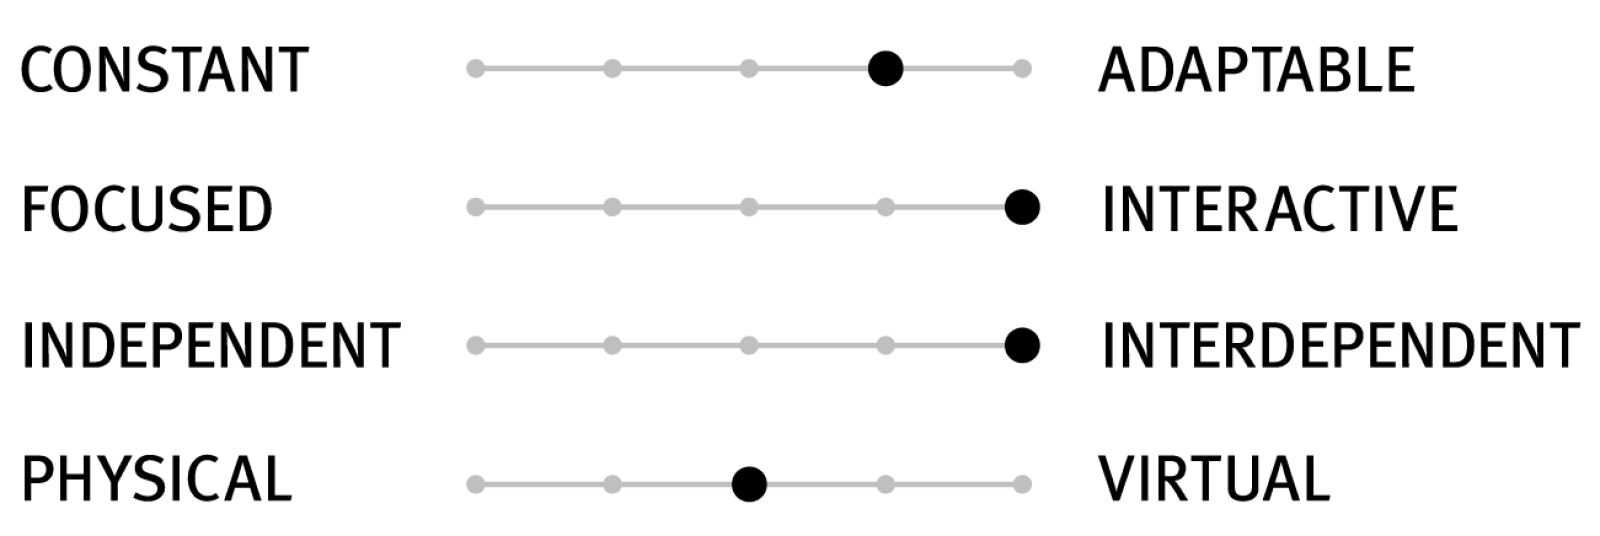 A scale with four sets of sliders that indicate the design characteristics of a setting. These sliders show moderate adaptability and a high level of interactivity and interdependence.